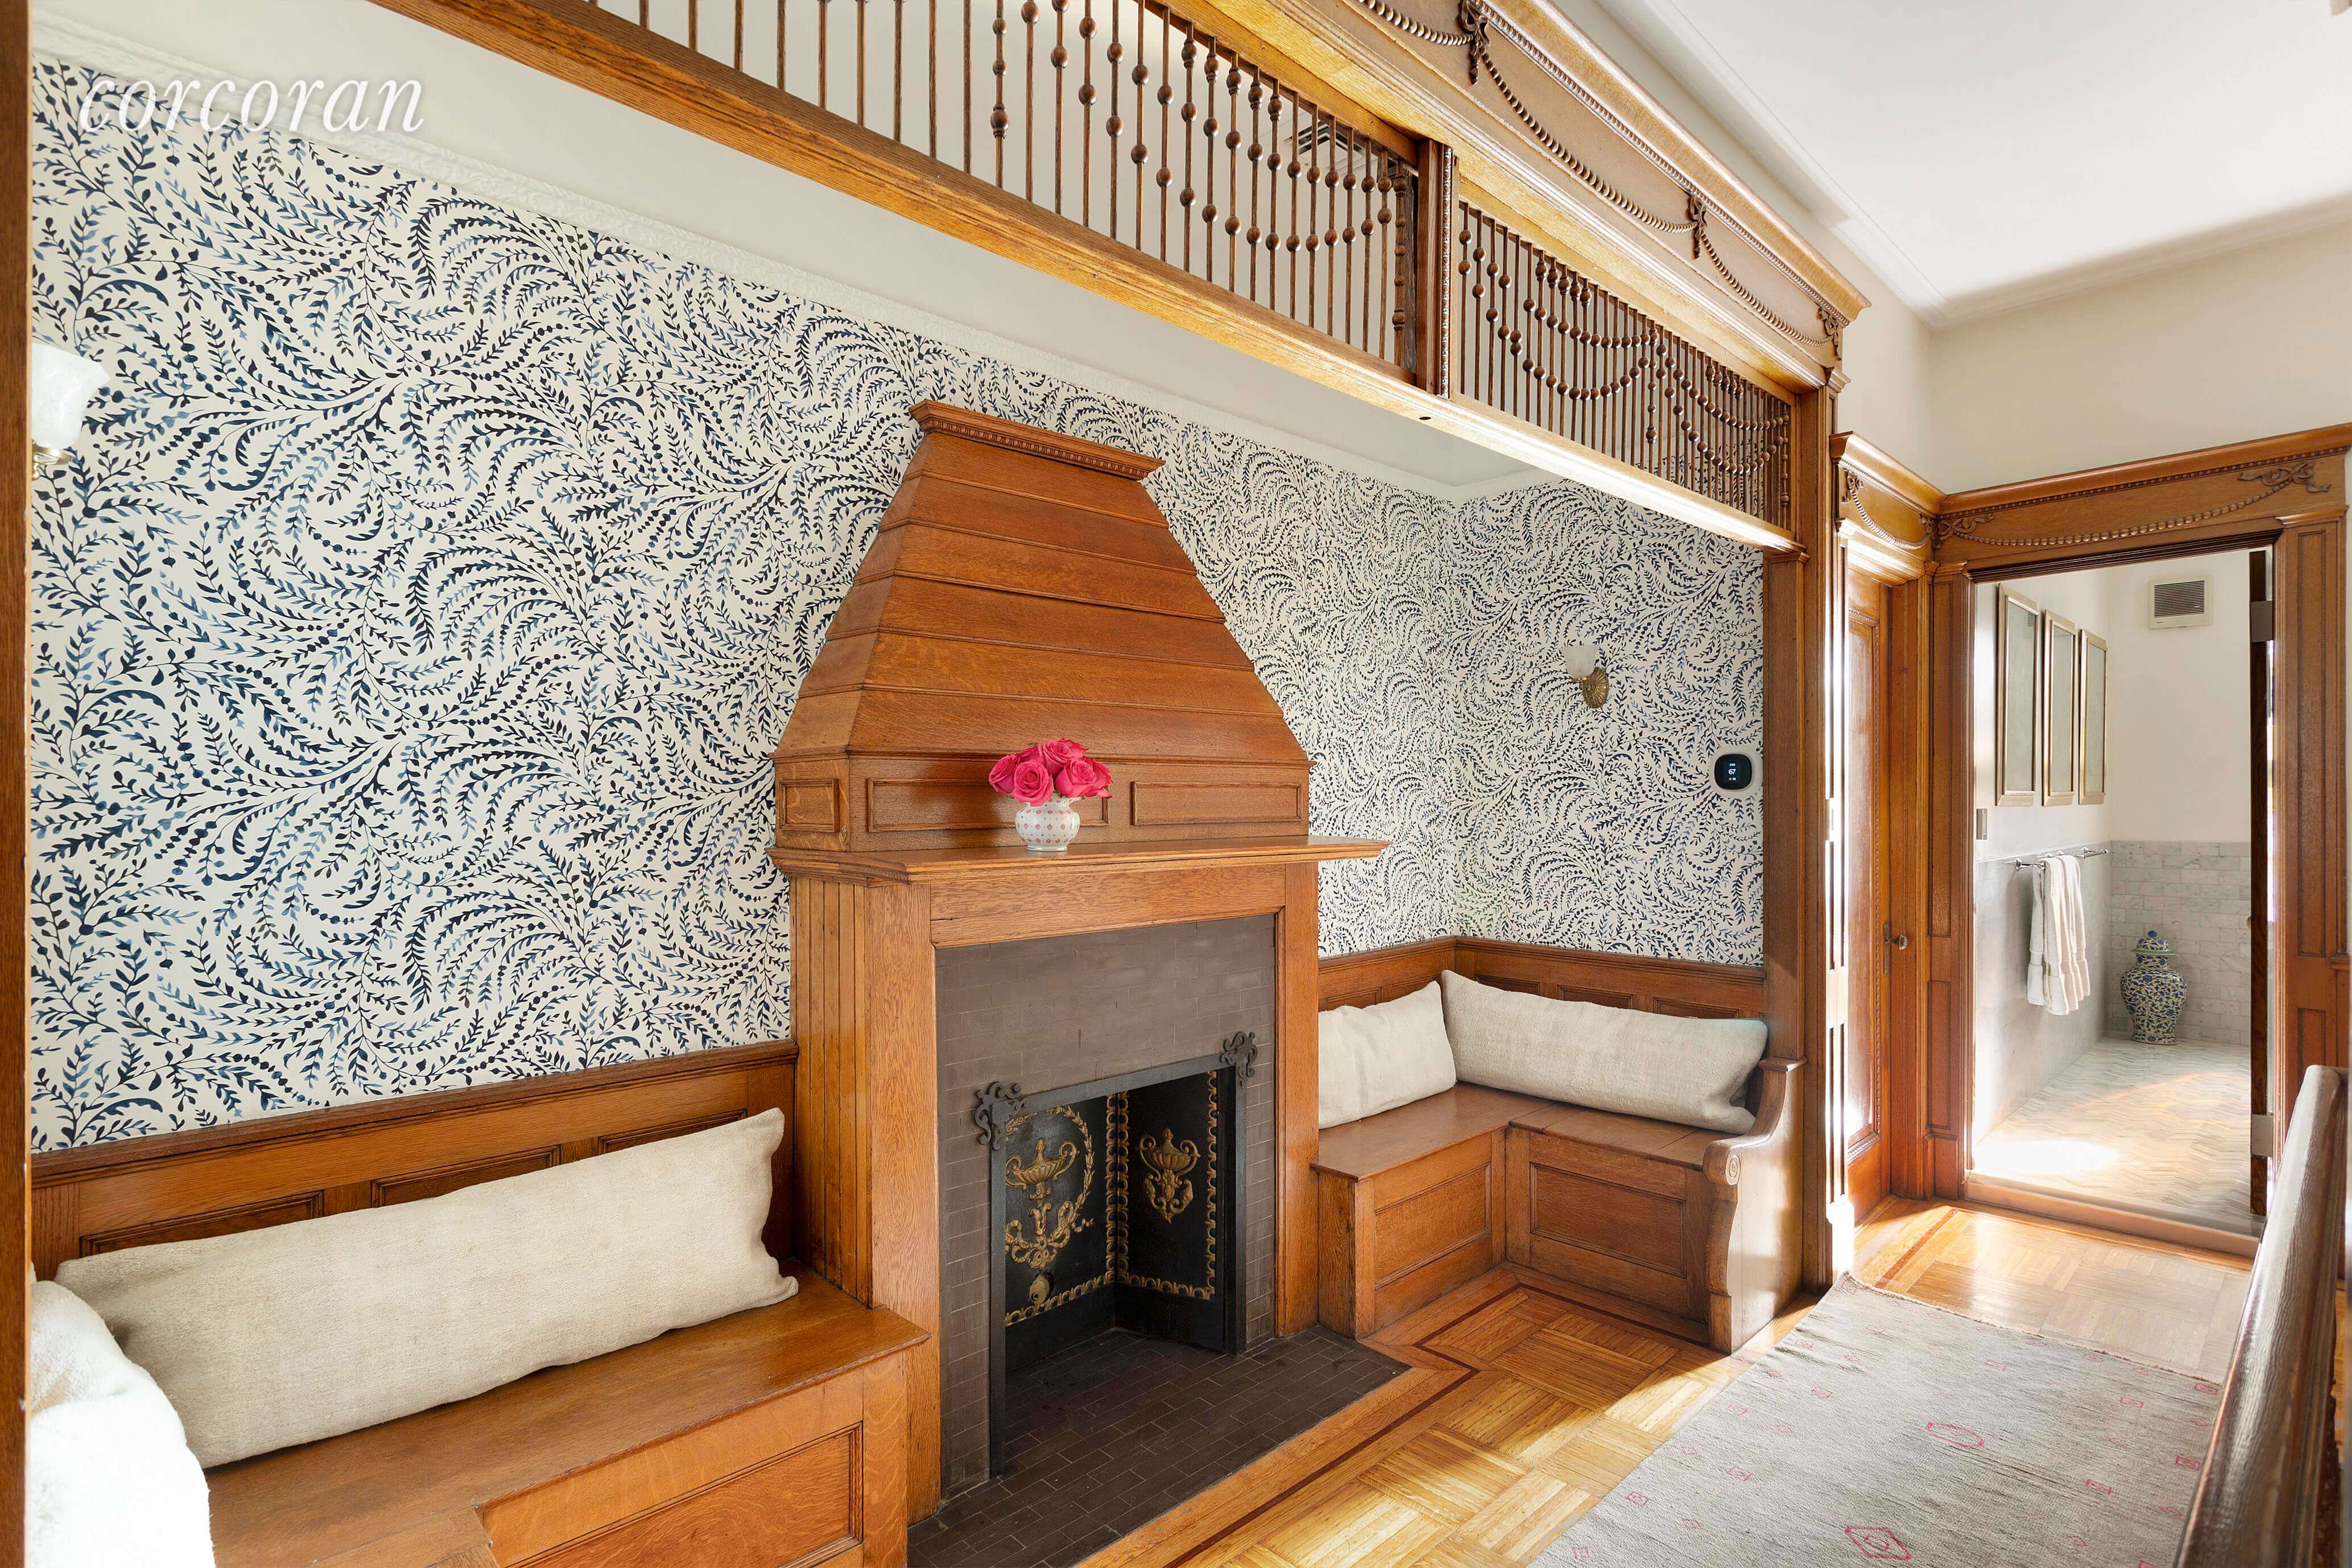 Grand Park Slope Artistic Home With Inglenook